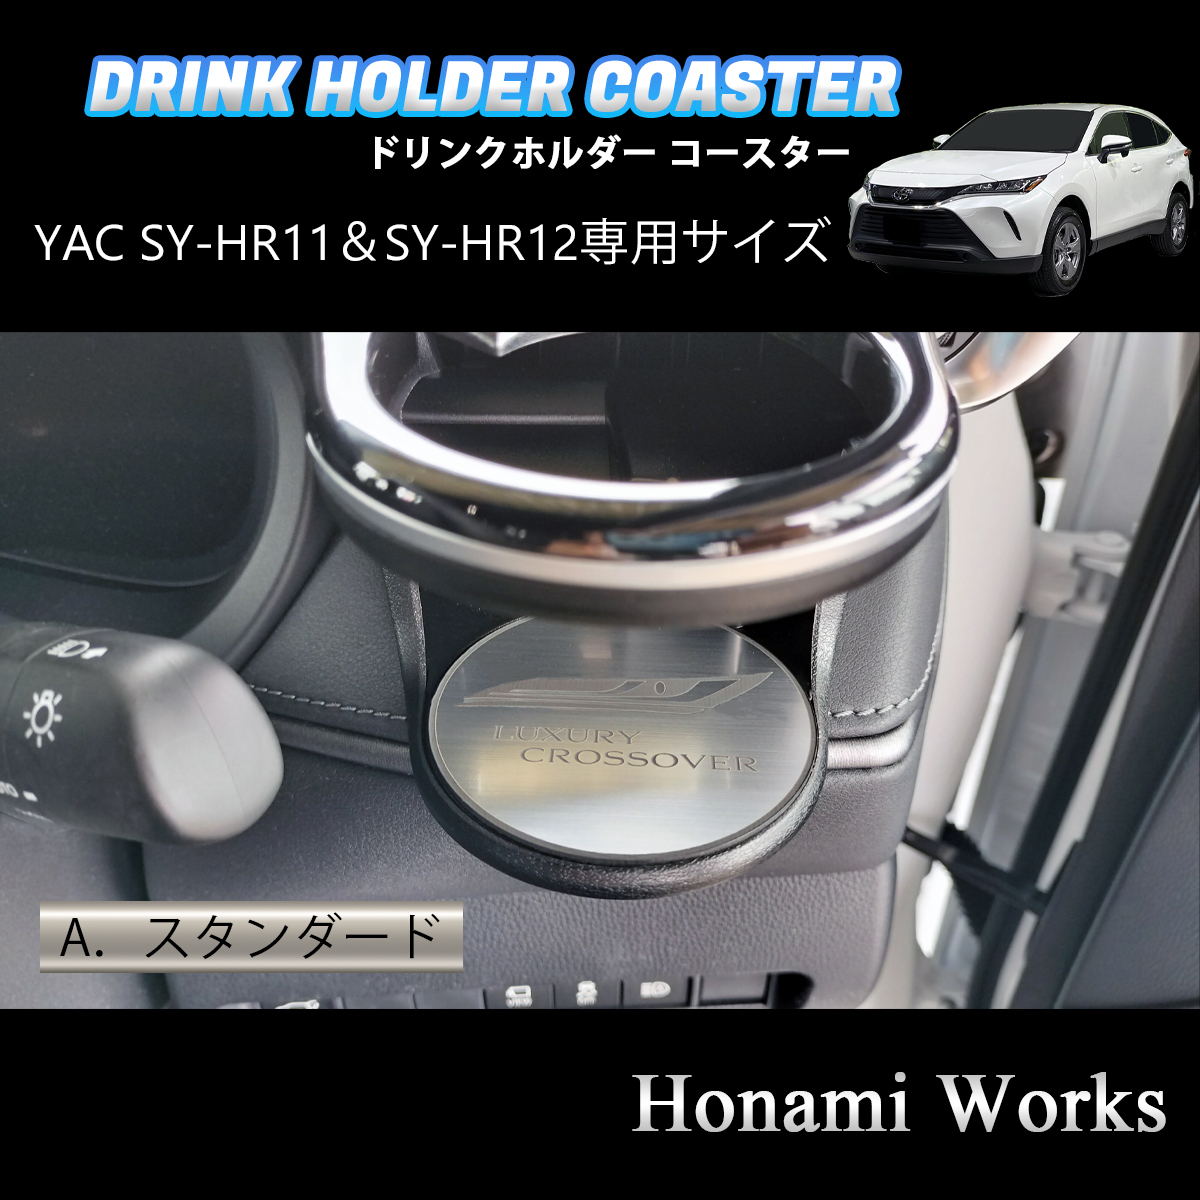  anonymity * guarantee! 4 kind from selection! new model 80 series Harrier HARRIER drink holder SY-HR11 SY-HR12 exclusive use mat YACyak garnish 